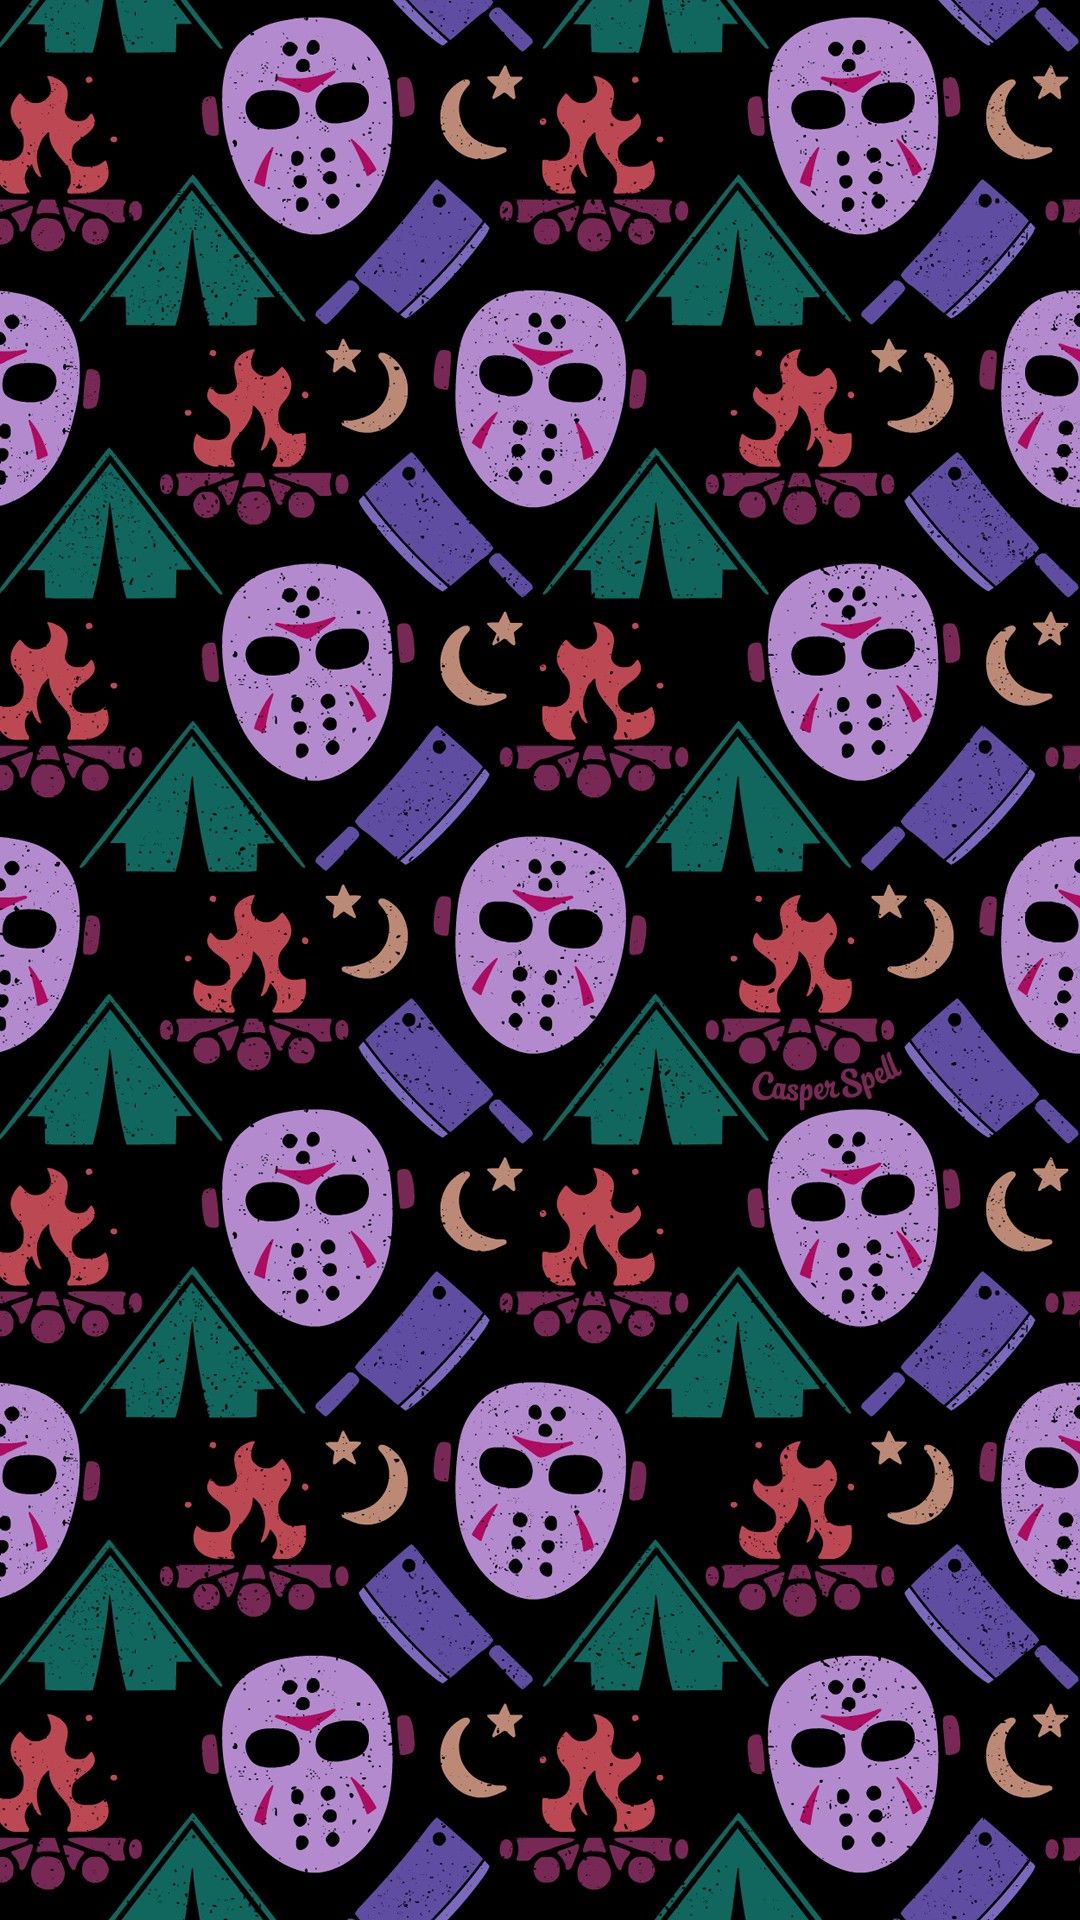 Camping with Jason Voorhees. Halloween wallpaper, Halloween wallpaper iphone, Art wallpaper